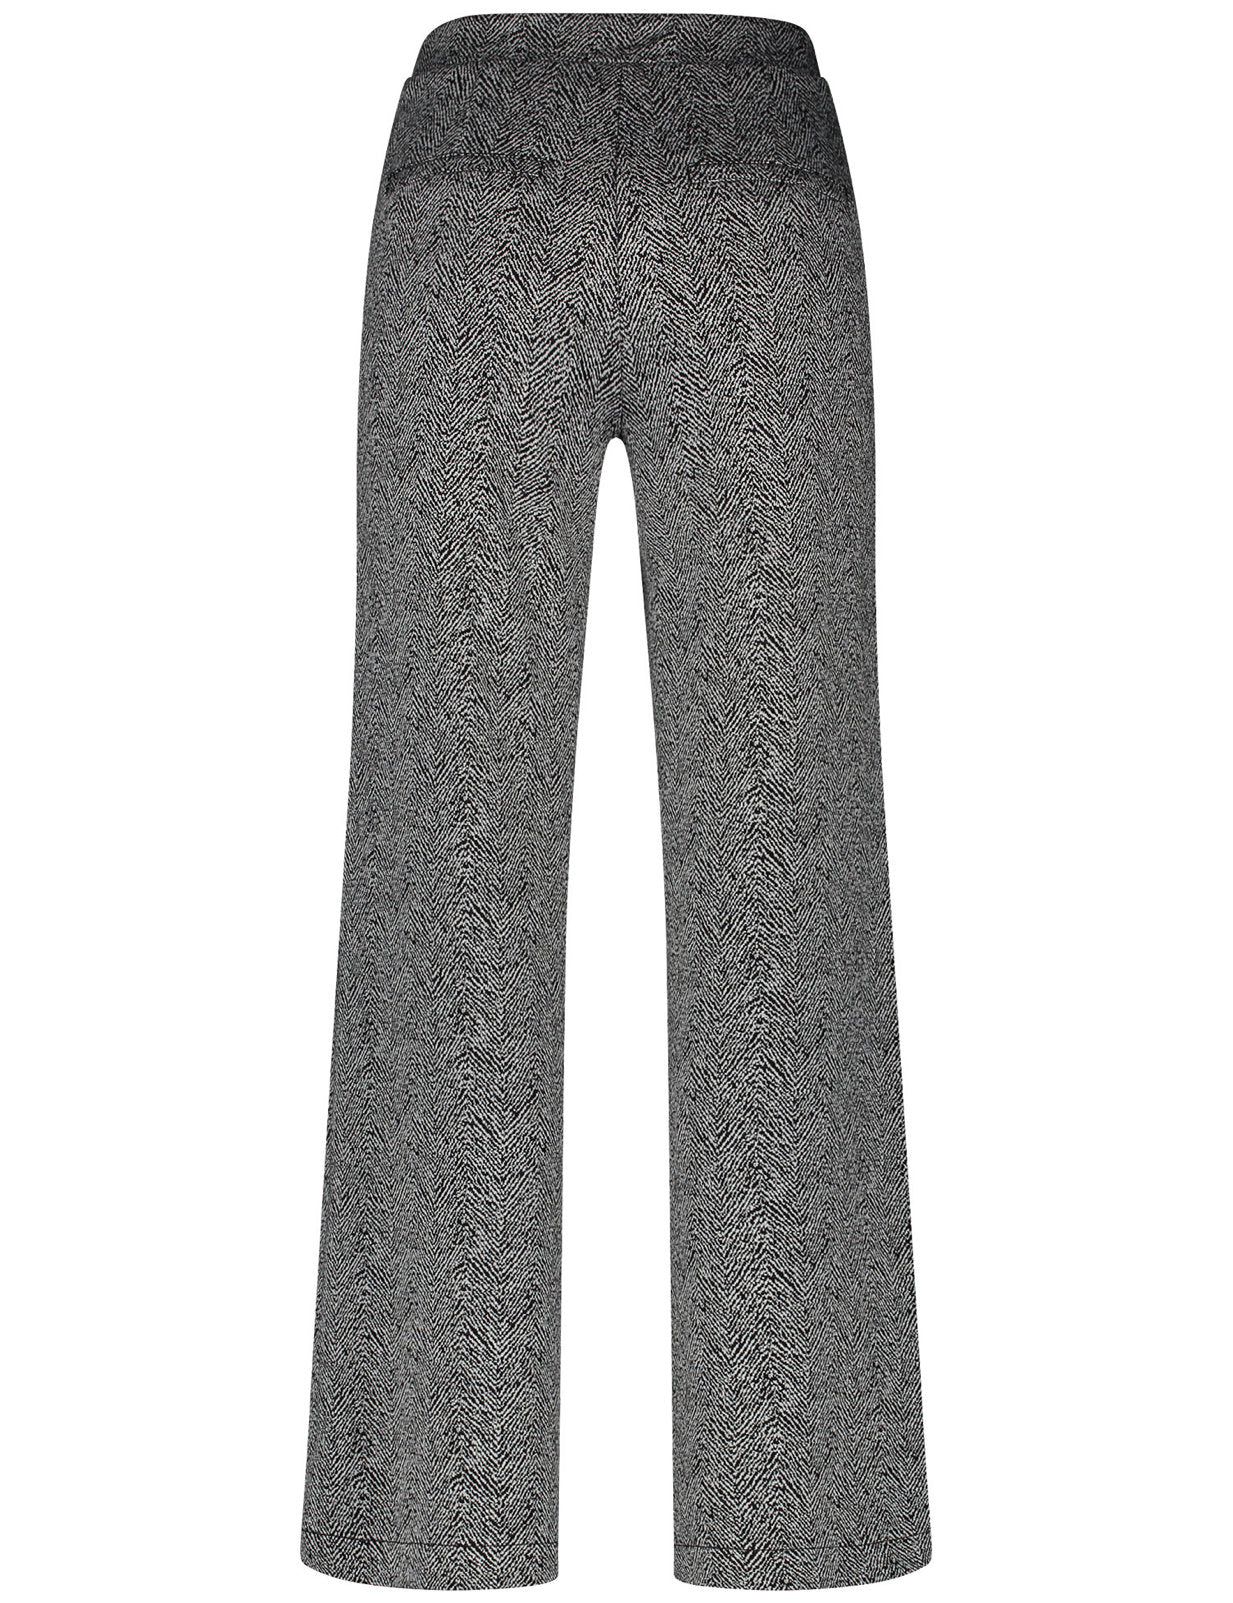 Pull-On Trousers With A Wide Leg And A Fine Houndstooth Pattern_122085-66281_1090_03